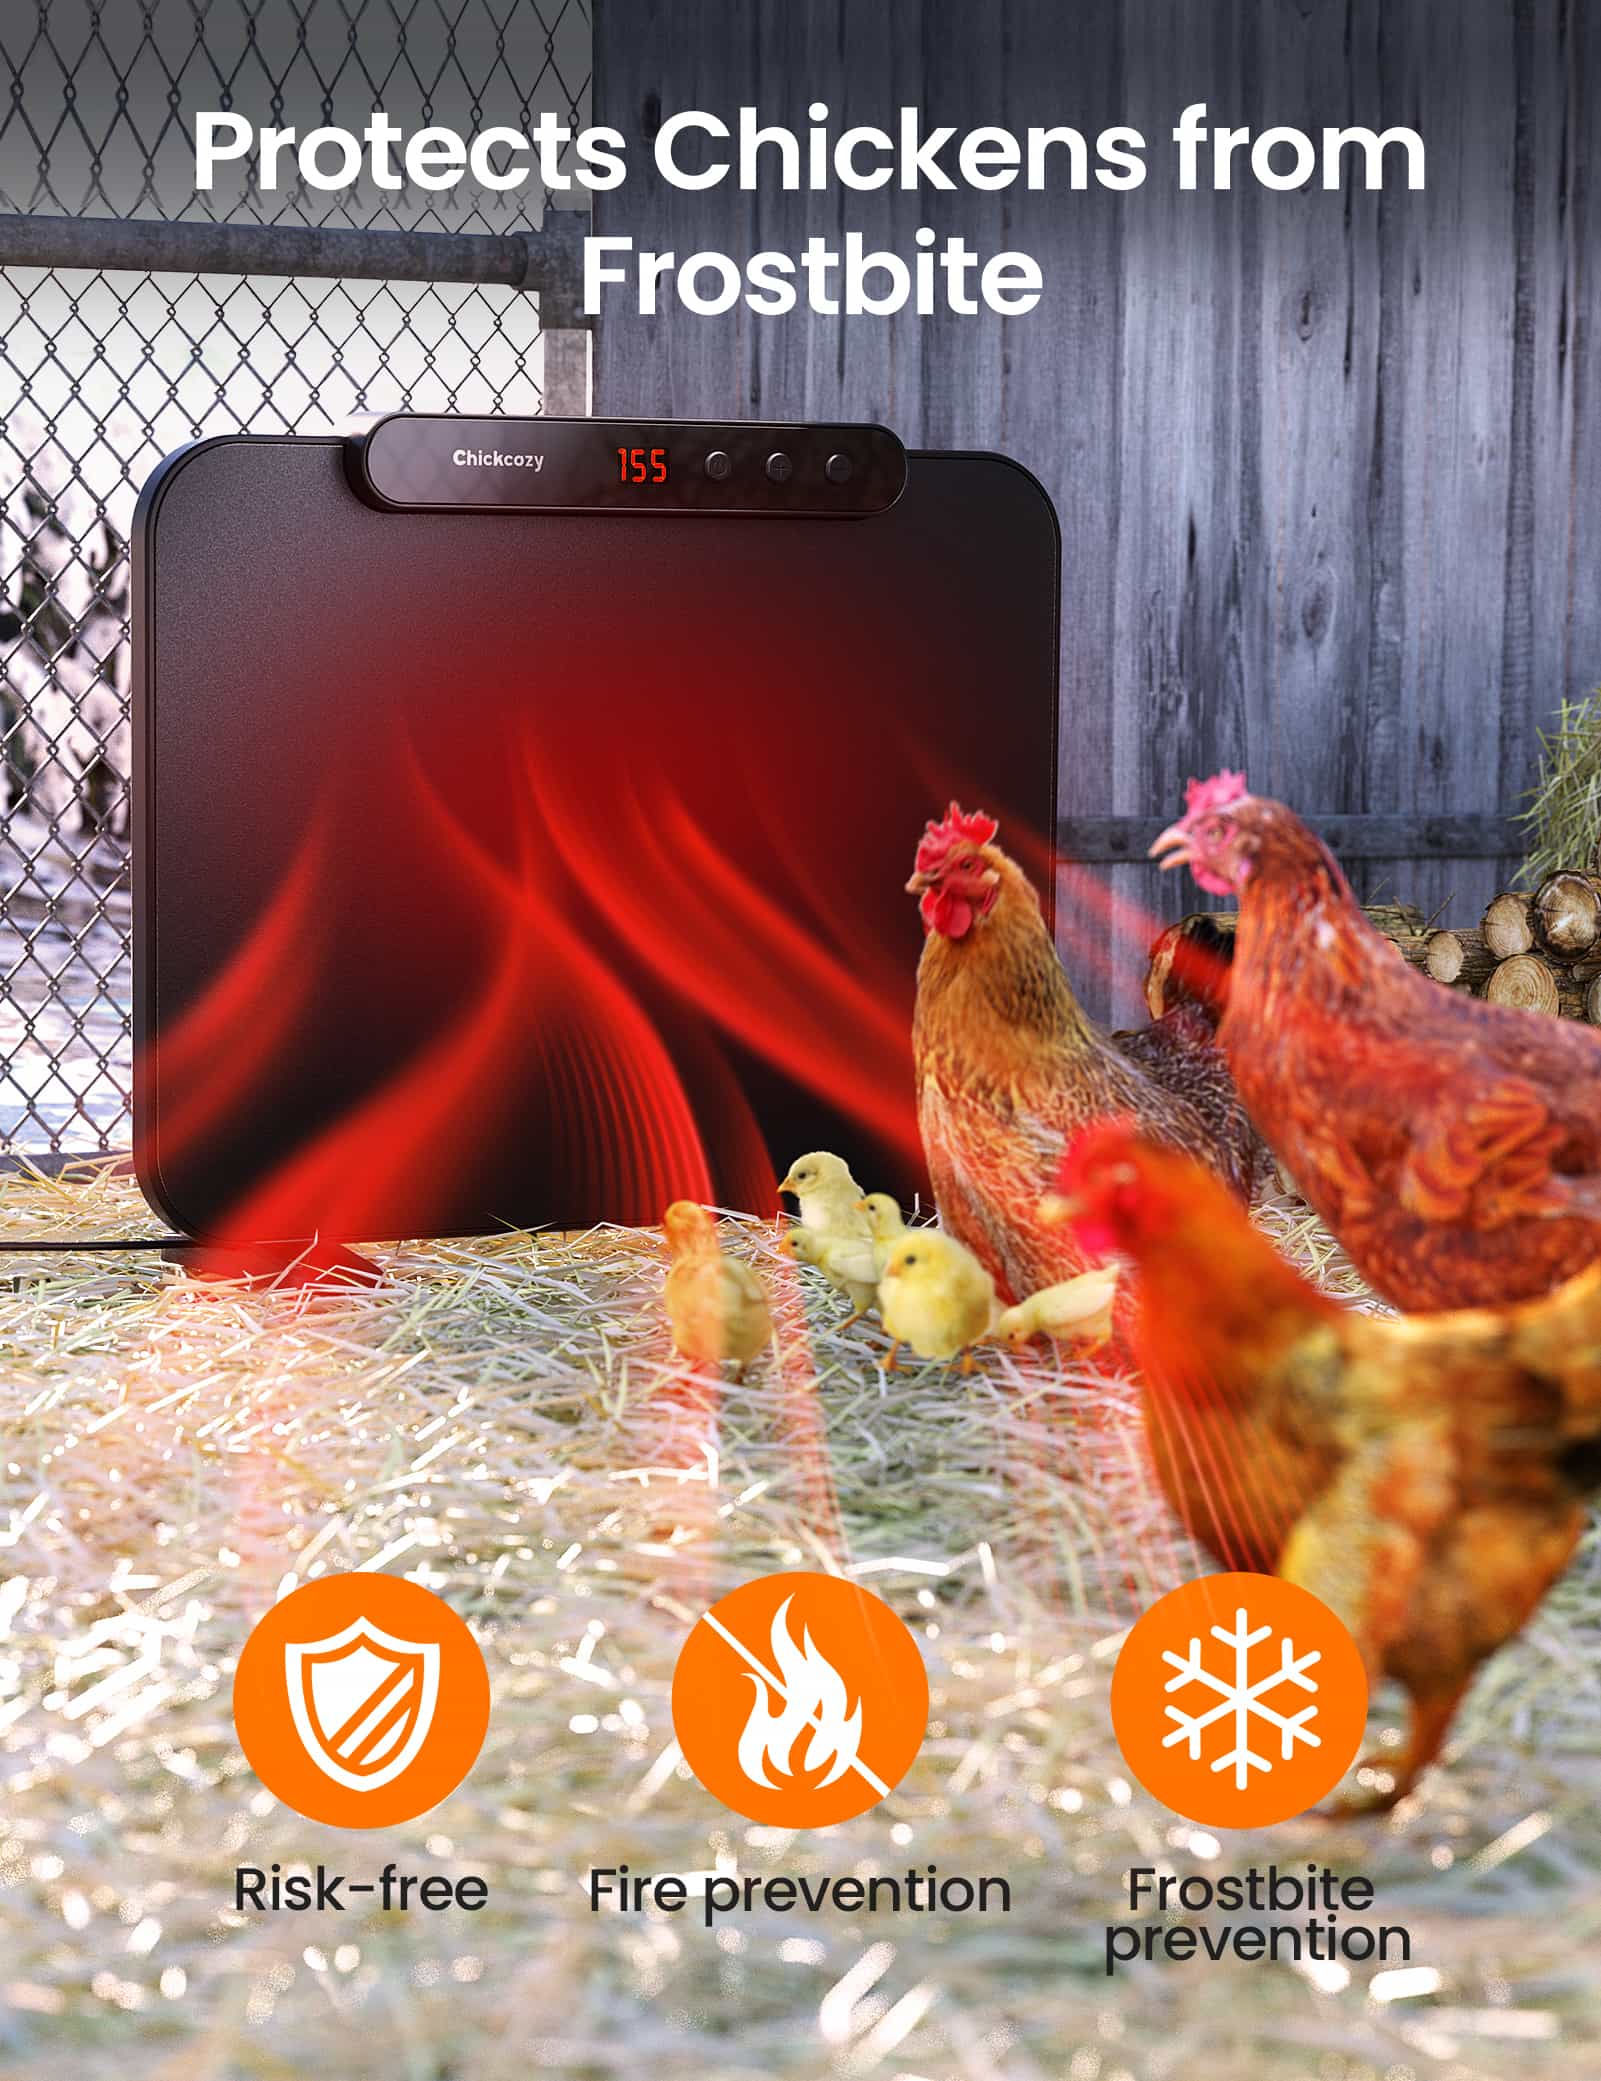 using_chicken_coop_heater_to_protect_chickens_from_frostbite